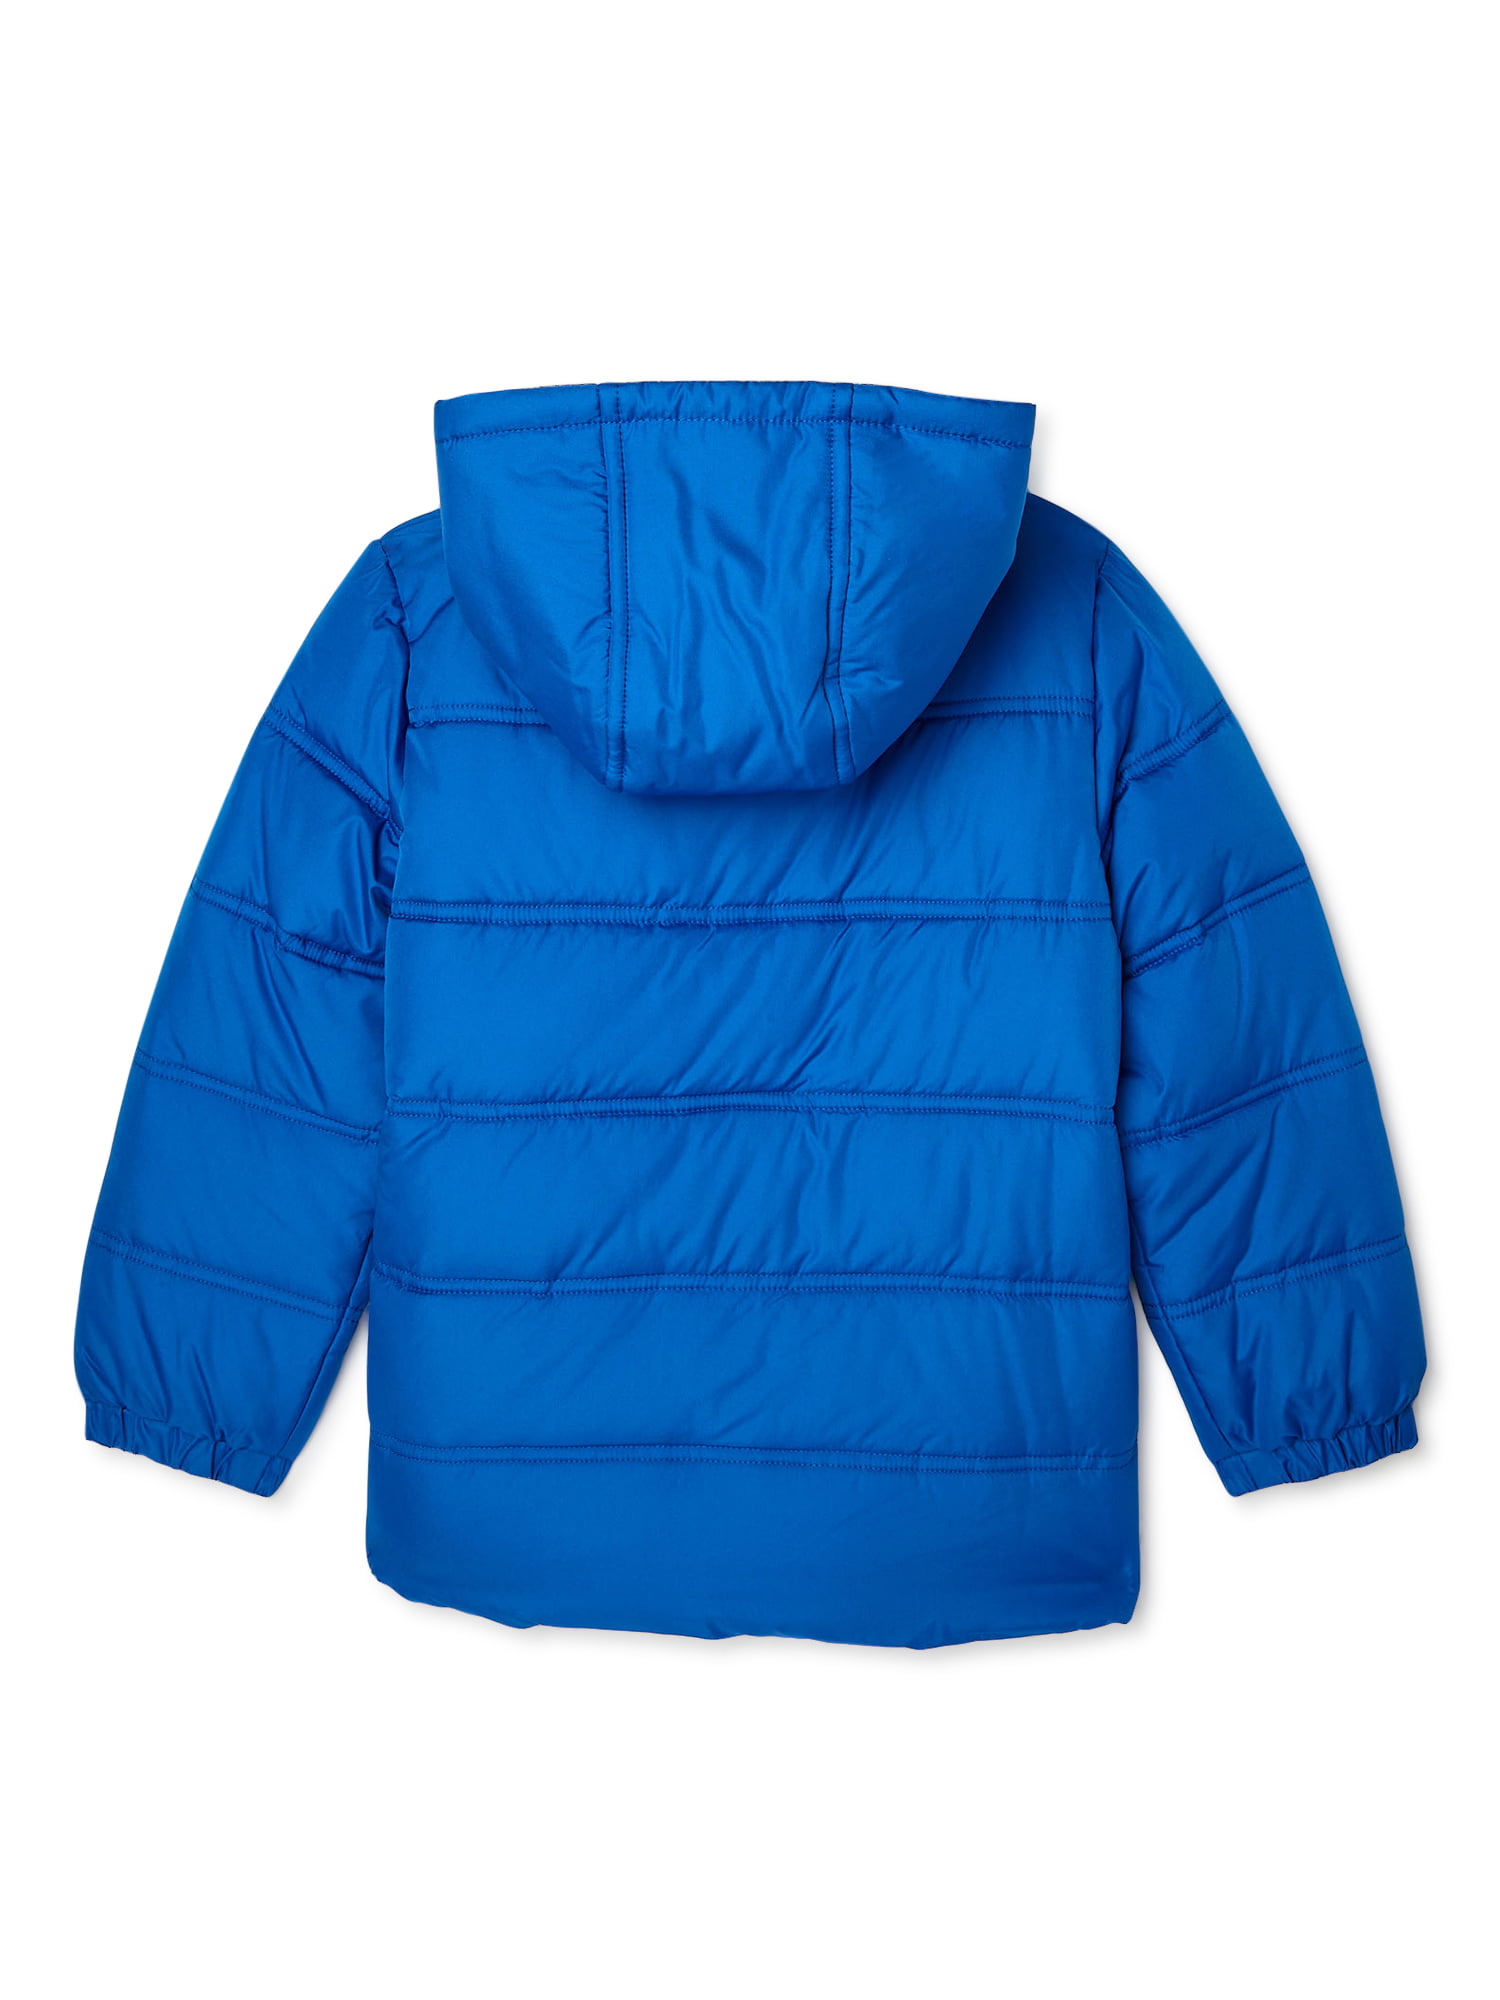 Ixtreme Big Boy Colorblock Puffer Jacket With Reflective Stripe